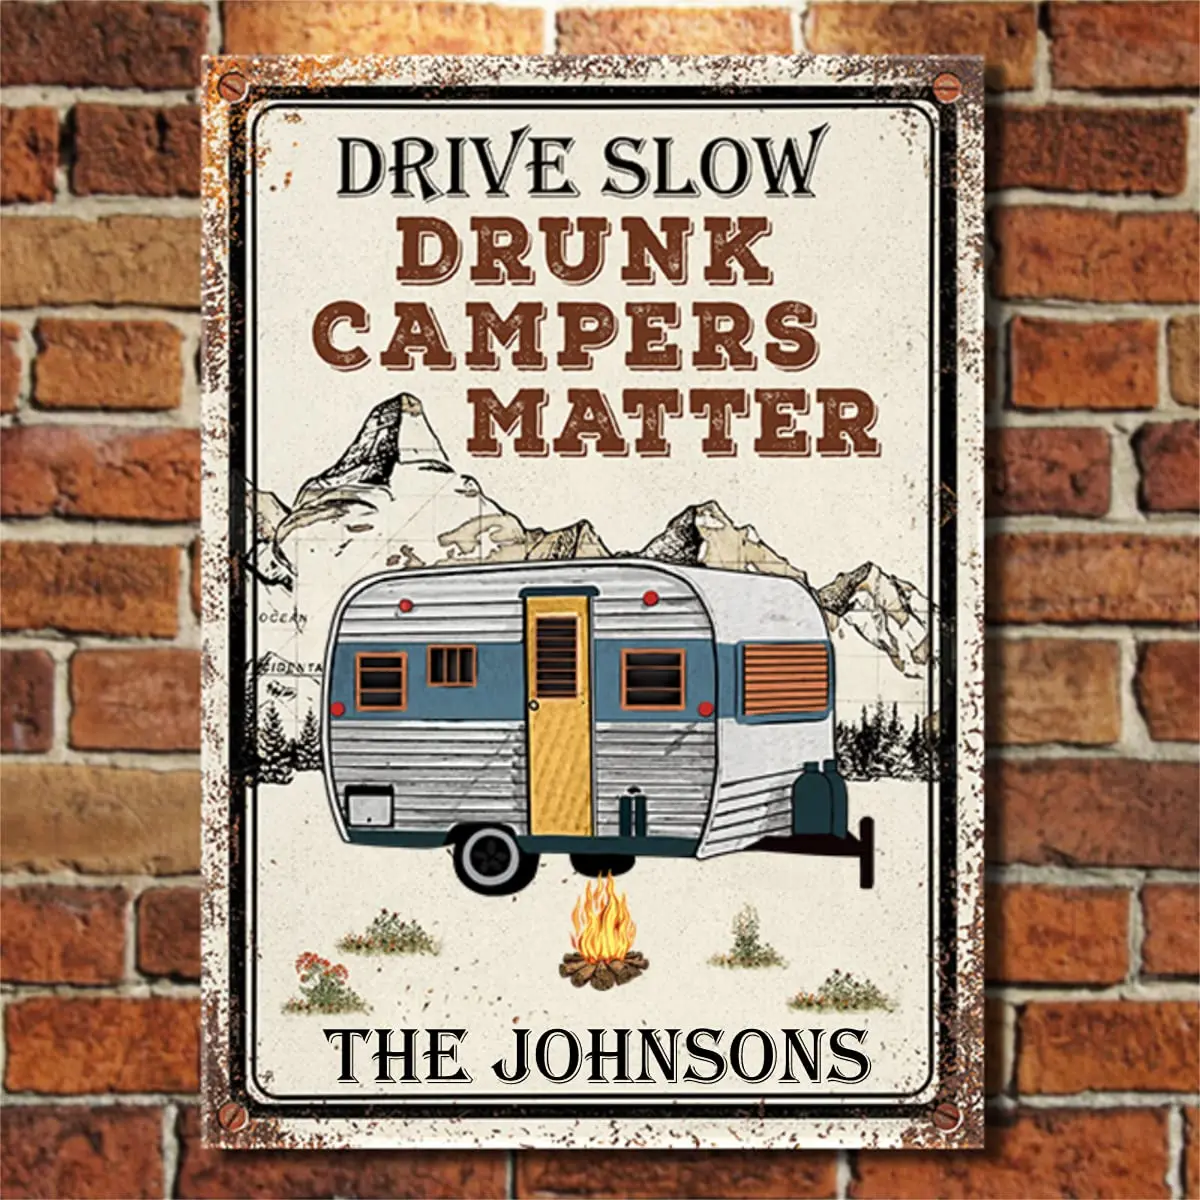 

GadgetsTalk Drive Slow Drunk Campers Matters - Funny Personalized Metal Sign - Funny Personalized Metal Sign - Gifts for Campers